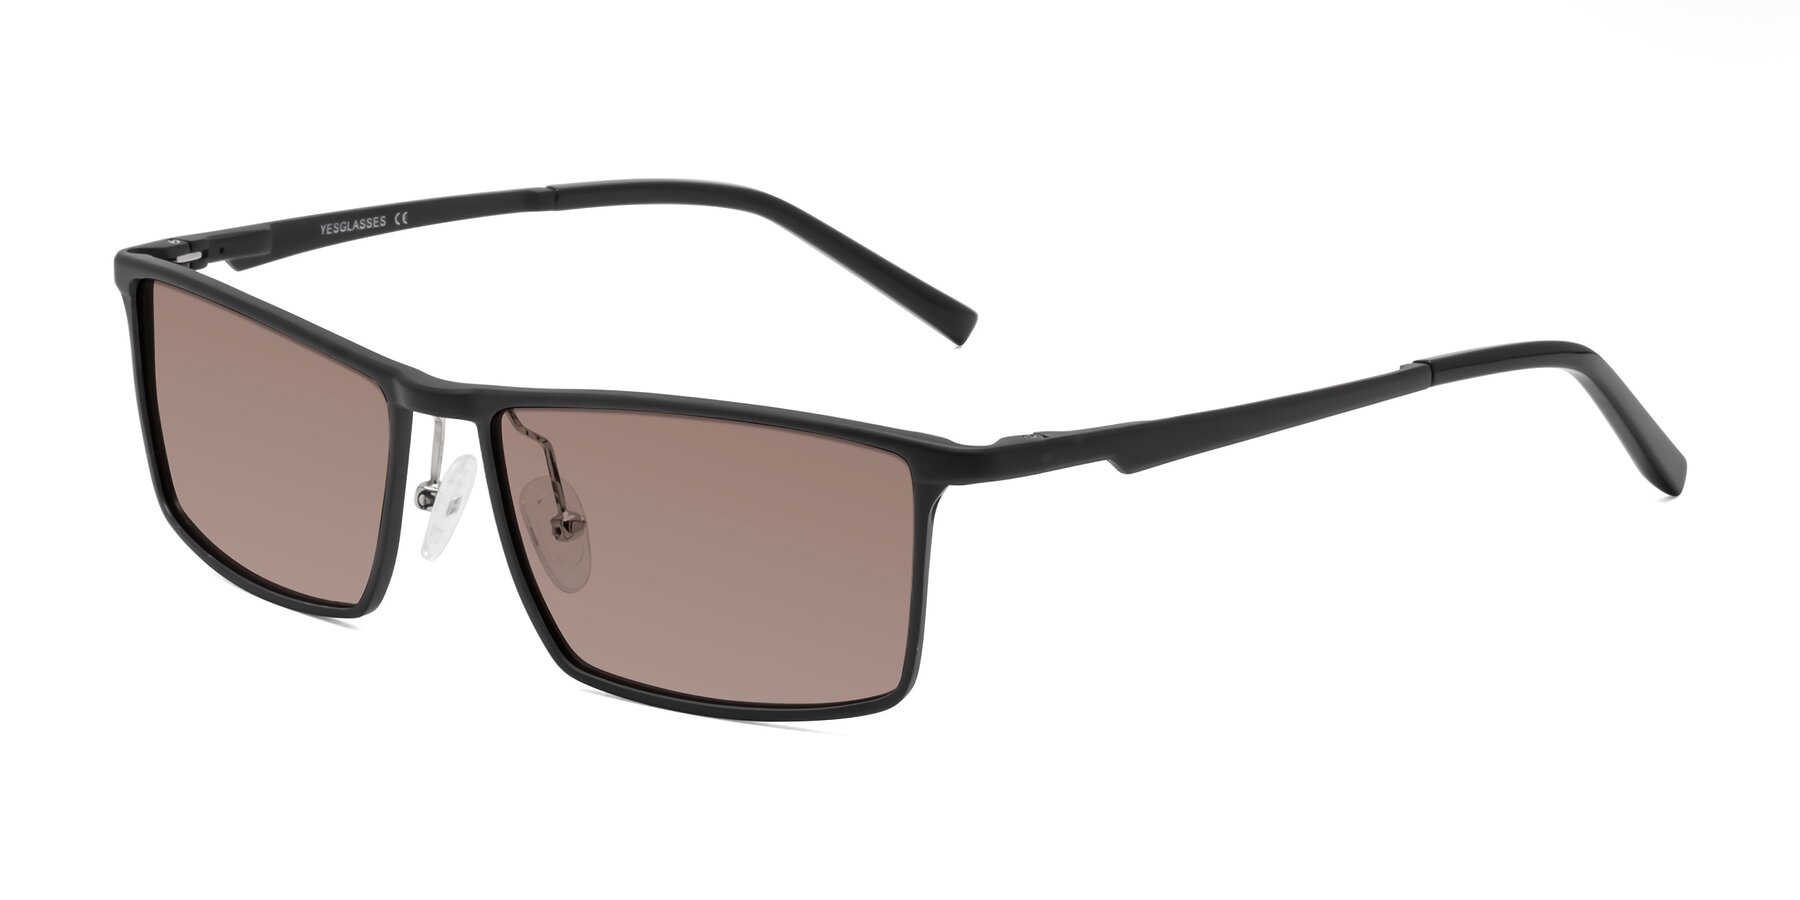 Angle of CX6330 in Black with Medium Brown Tinted Lenses